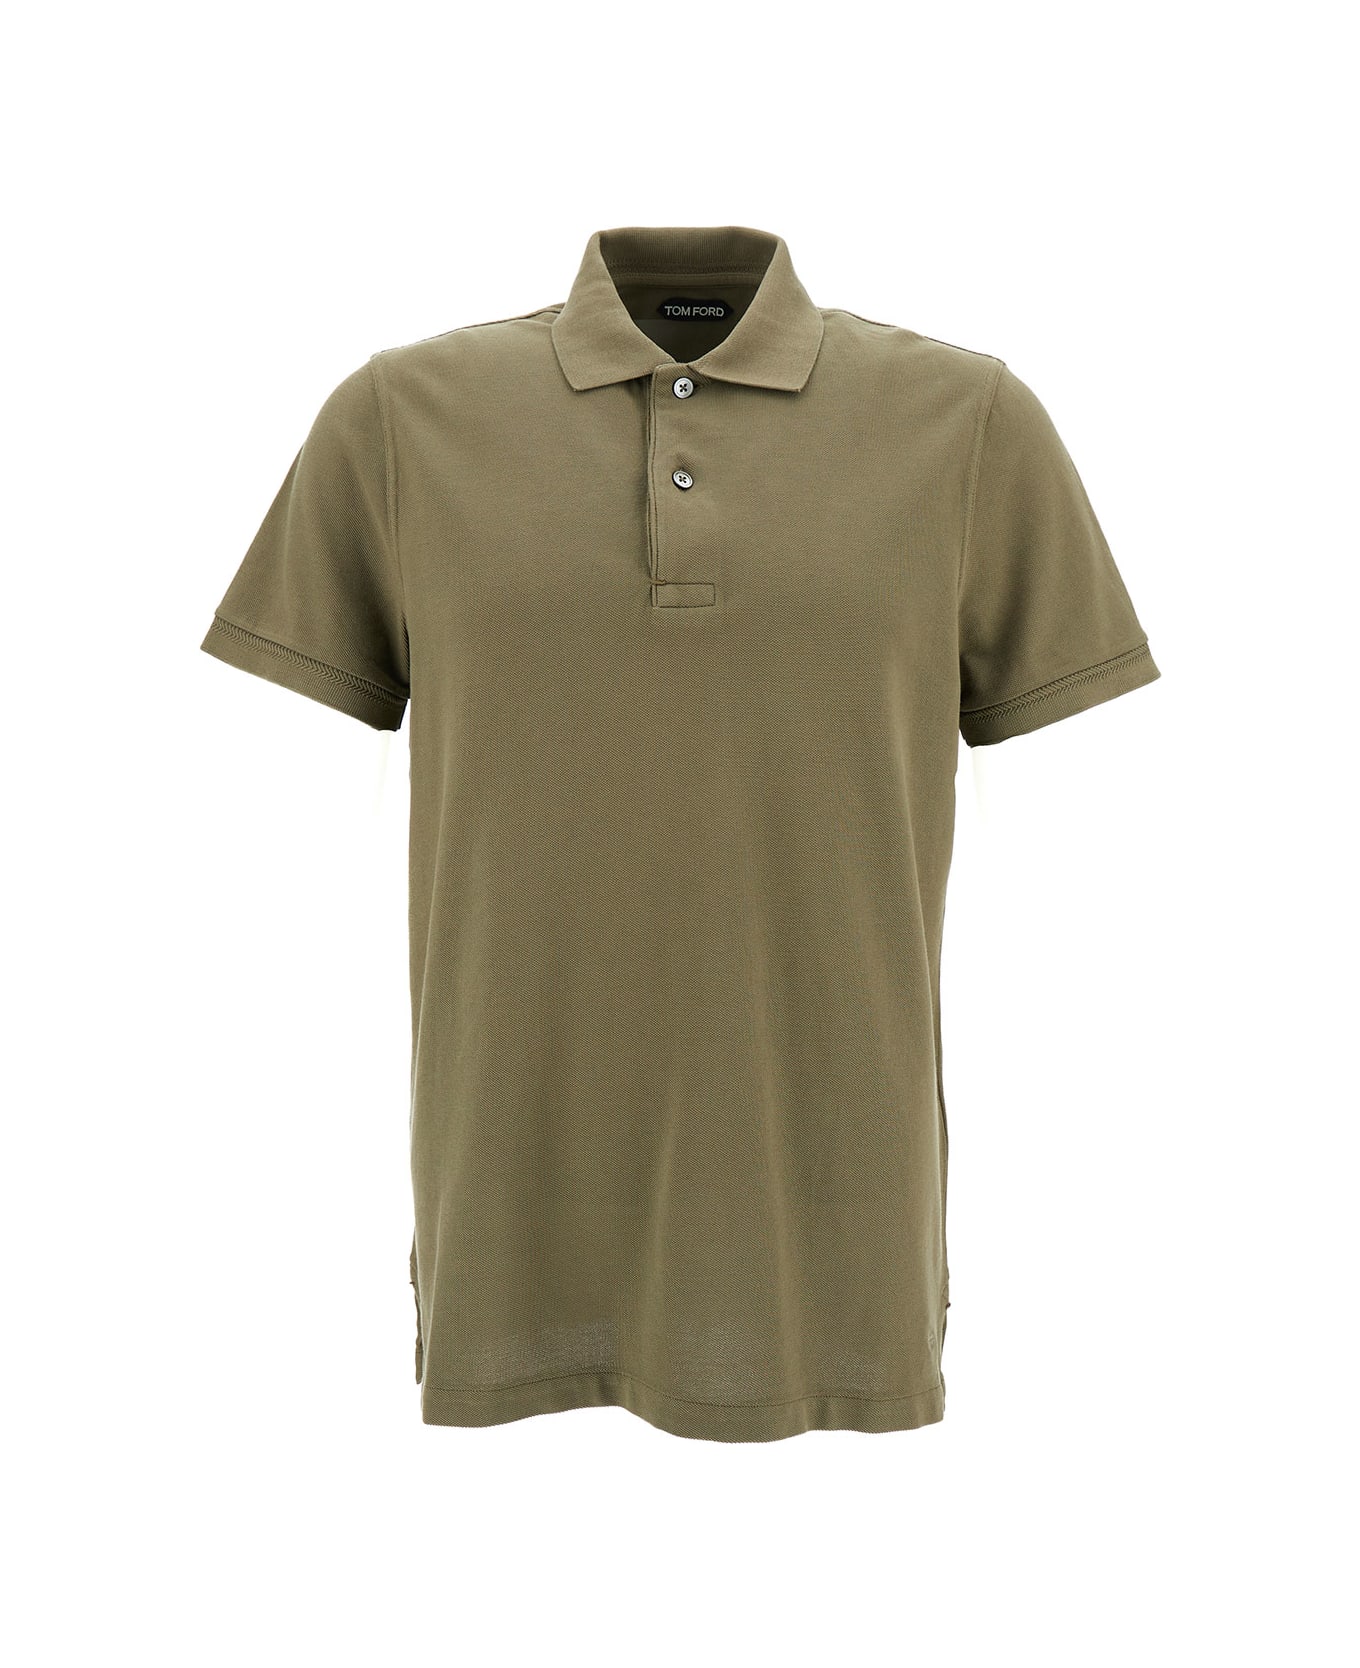 Tom Ford Olive Green Polo Shirt With Short Sleeves In Cotton Man - Green